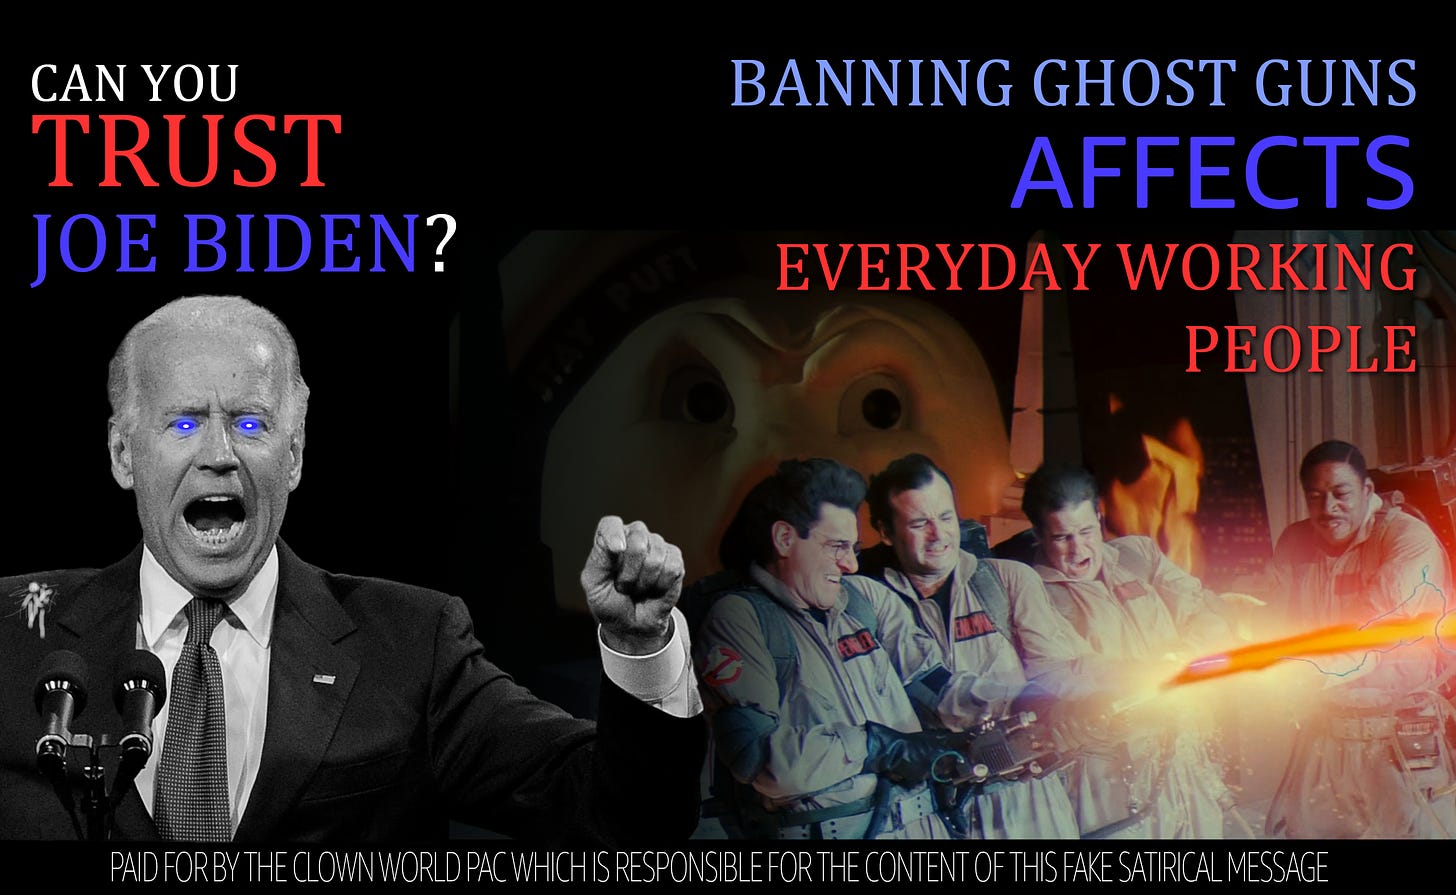 Banning Ghost Guns Affects Everyday Hard Working People